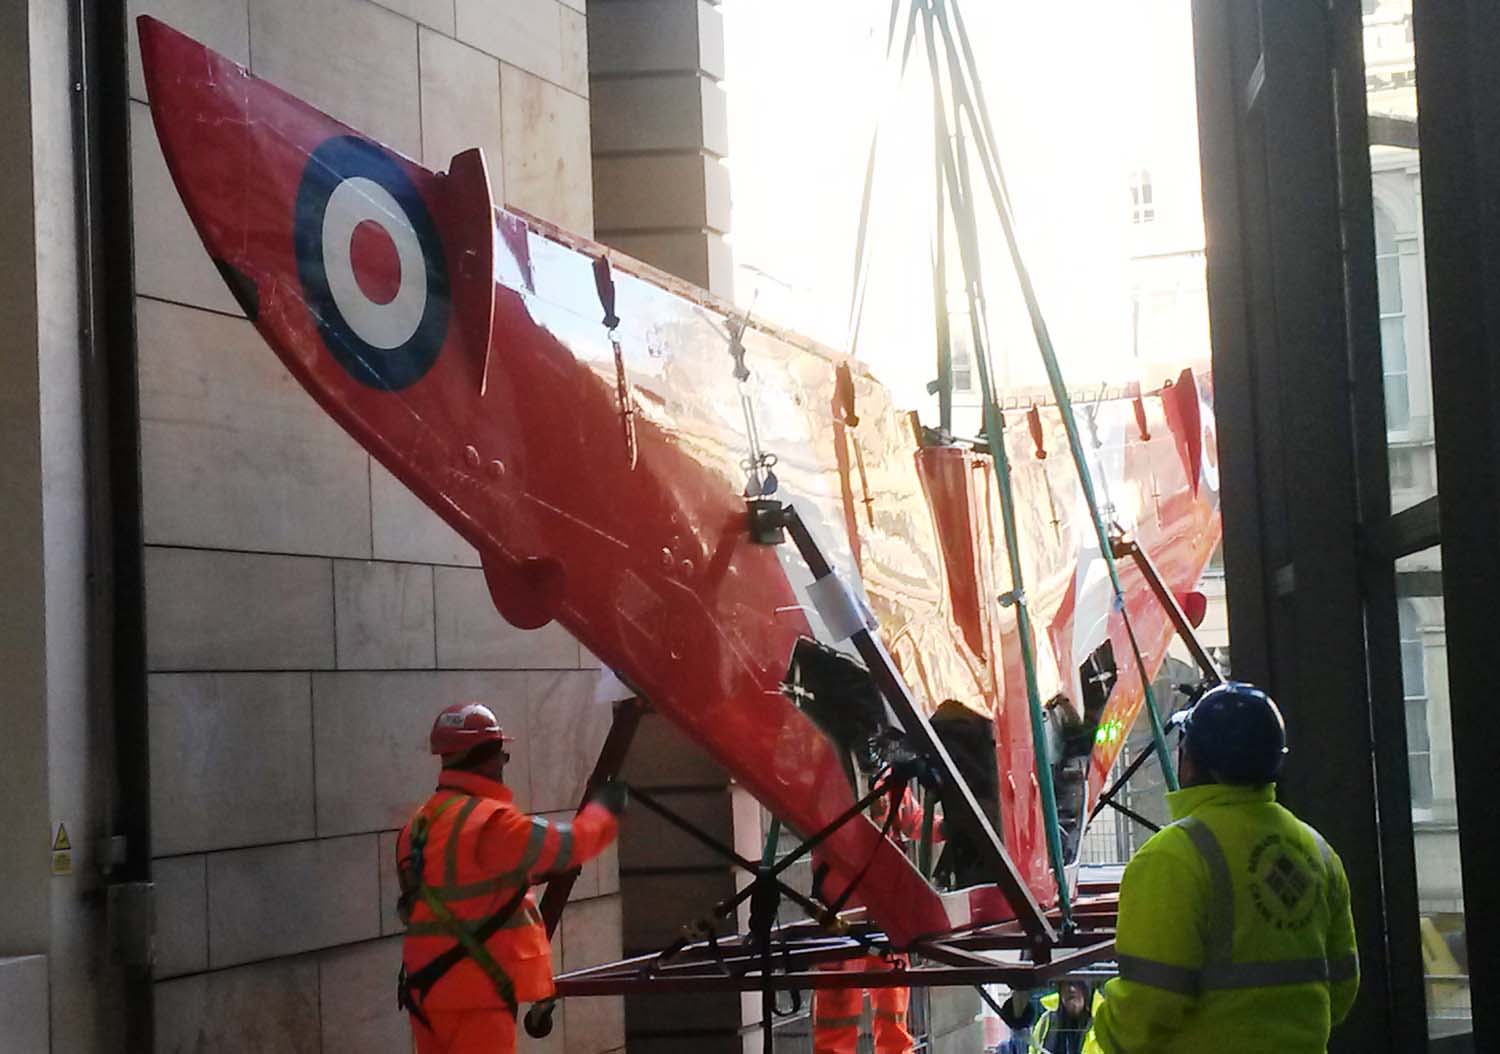 Hawk wings entering the National Museum of Scotland